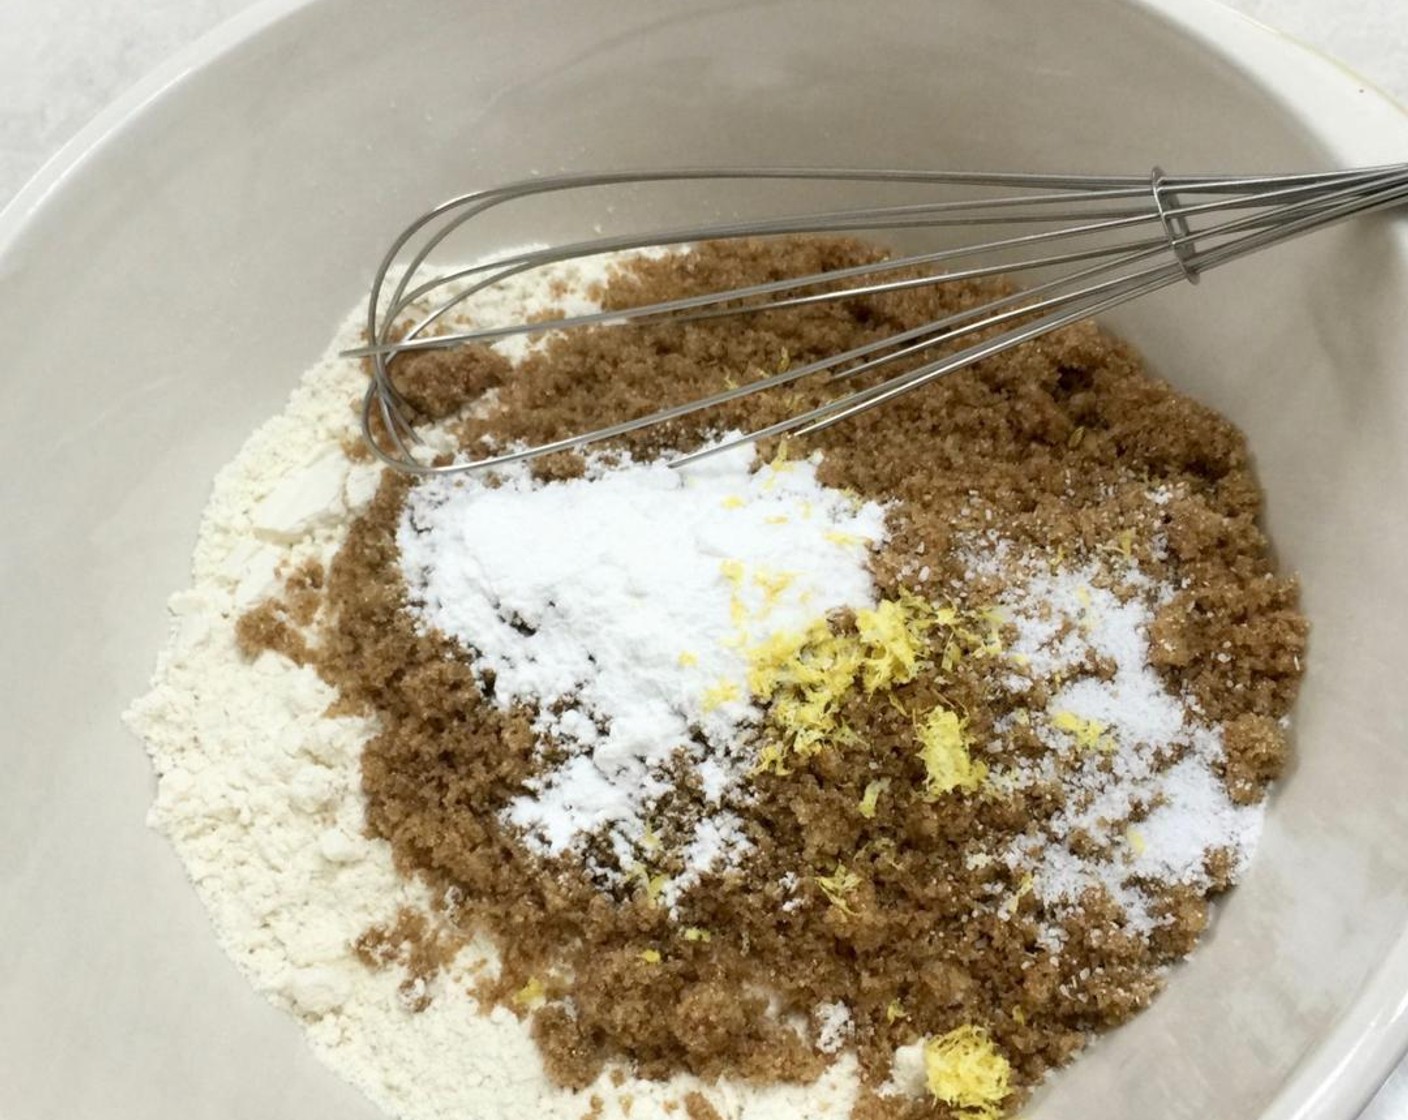 step 5 In a large bowl, add in the dry ingredients: All-Purpose Flour (3 cups), Brown Sugar (1 cup), Baking Powder (1 Tbsp),Salt (1/2 tsp) and Lemon Zest.